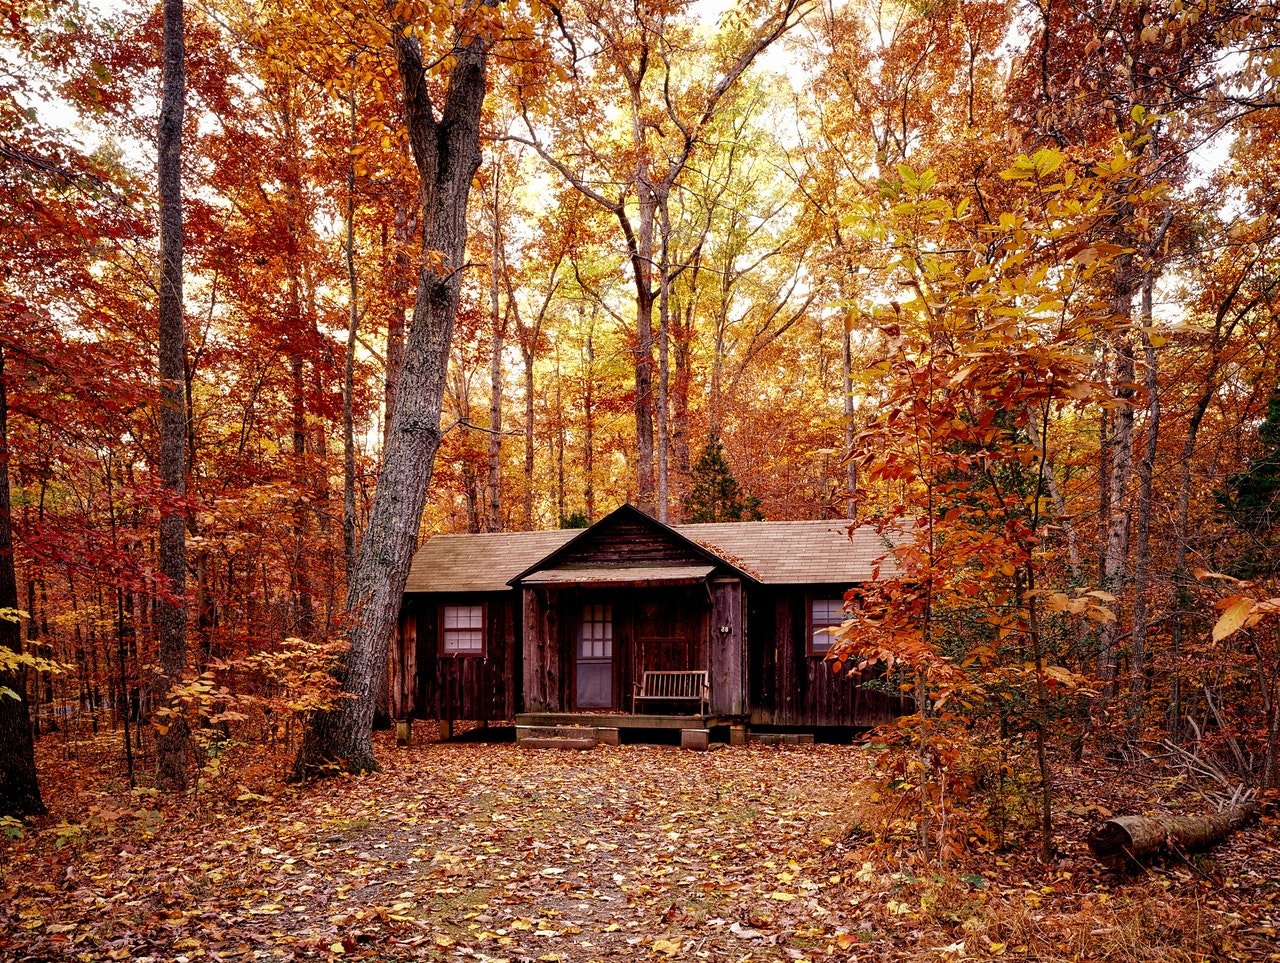 Photo of a wooden cabin located in the woods | Photo: Pexels